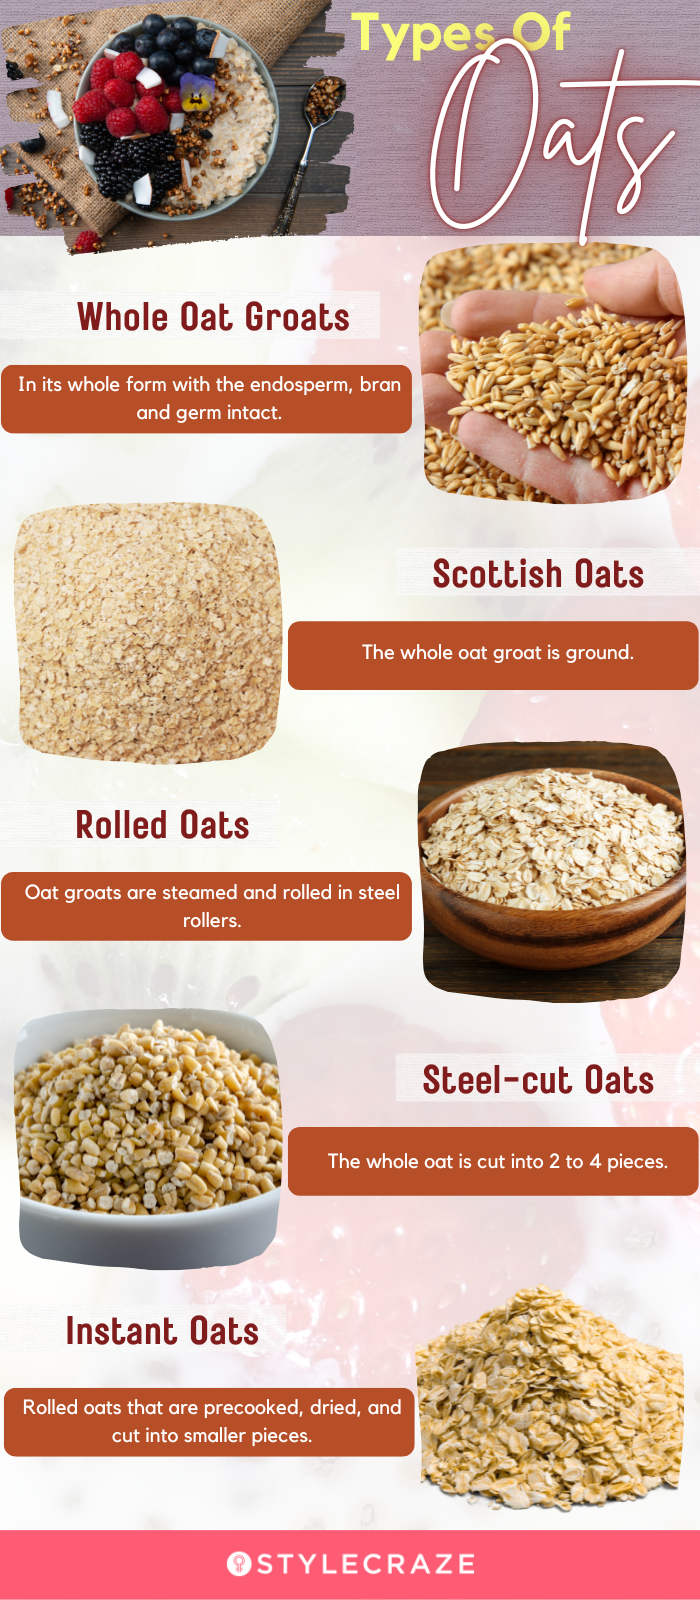 types of oats [infographic]